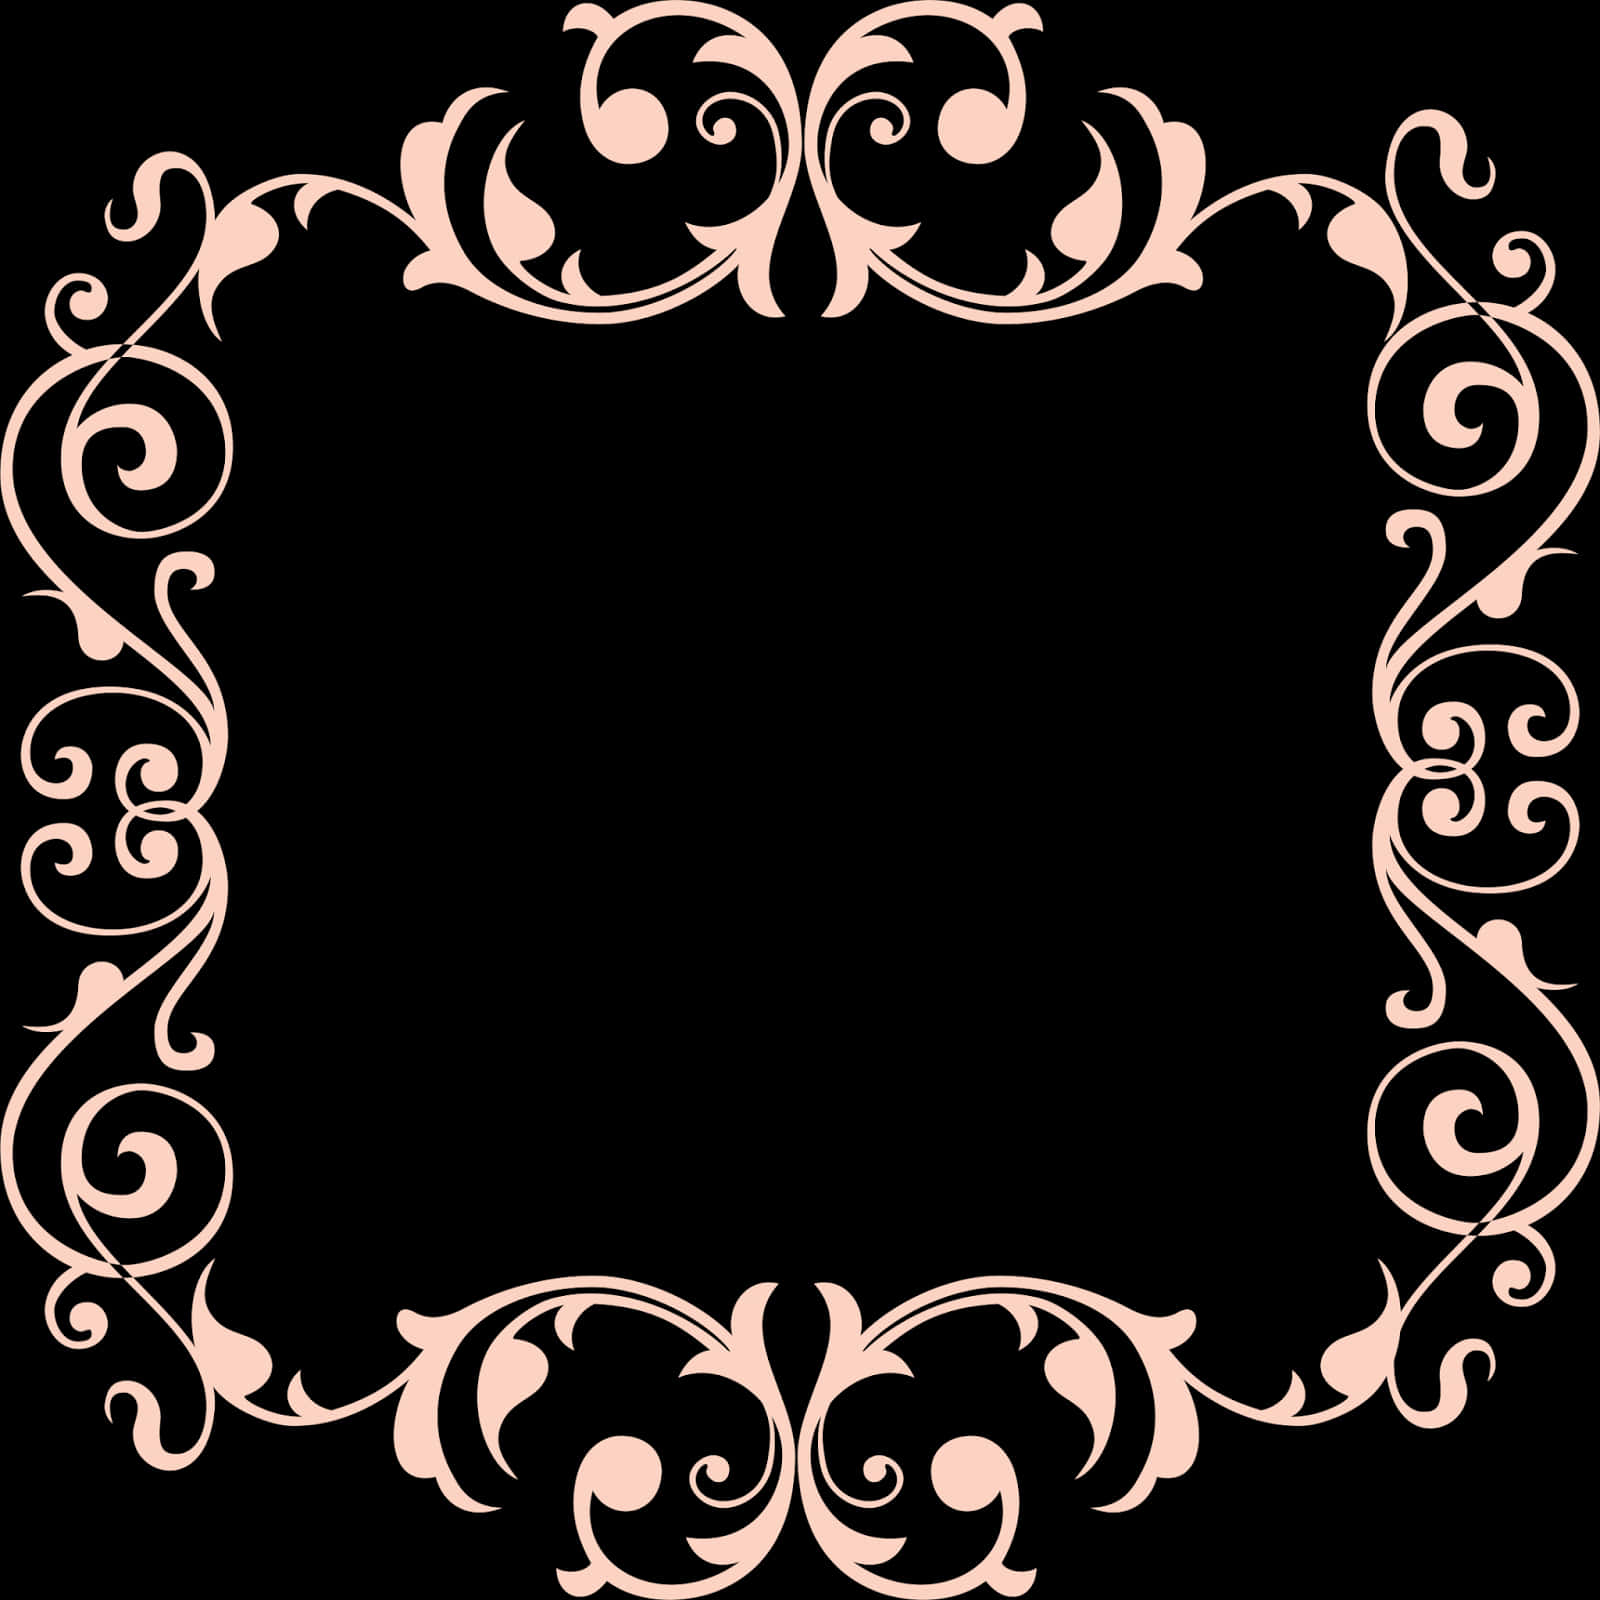 A Square Frame With Swirls And Swirls